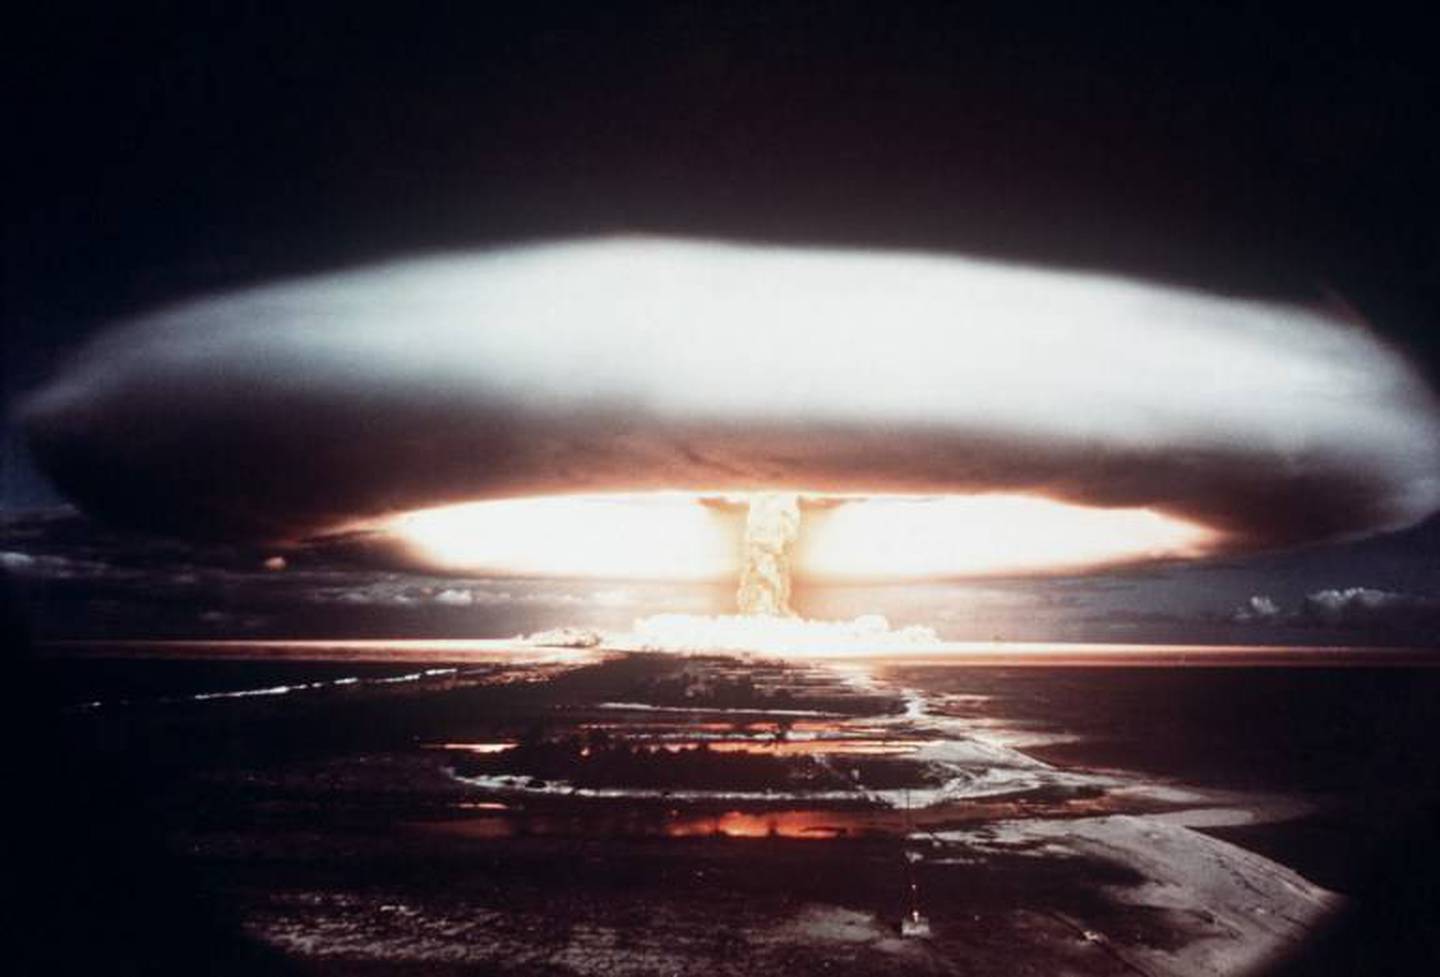 Scientists Determine The Deadliest Place To Take Refuge In The Event Of A Nuclear Explosion In Your City